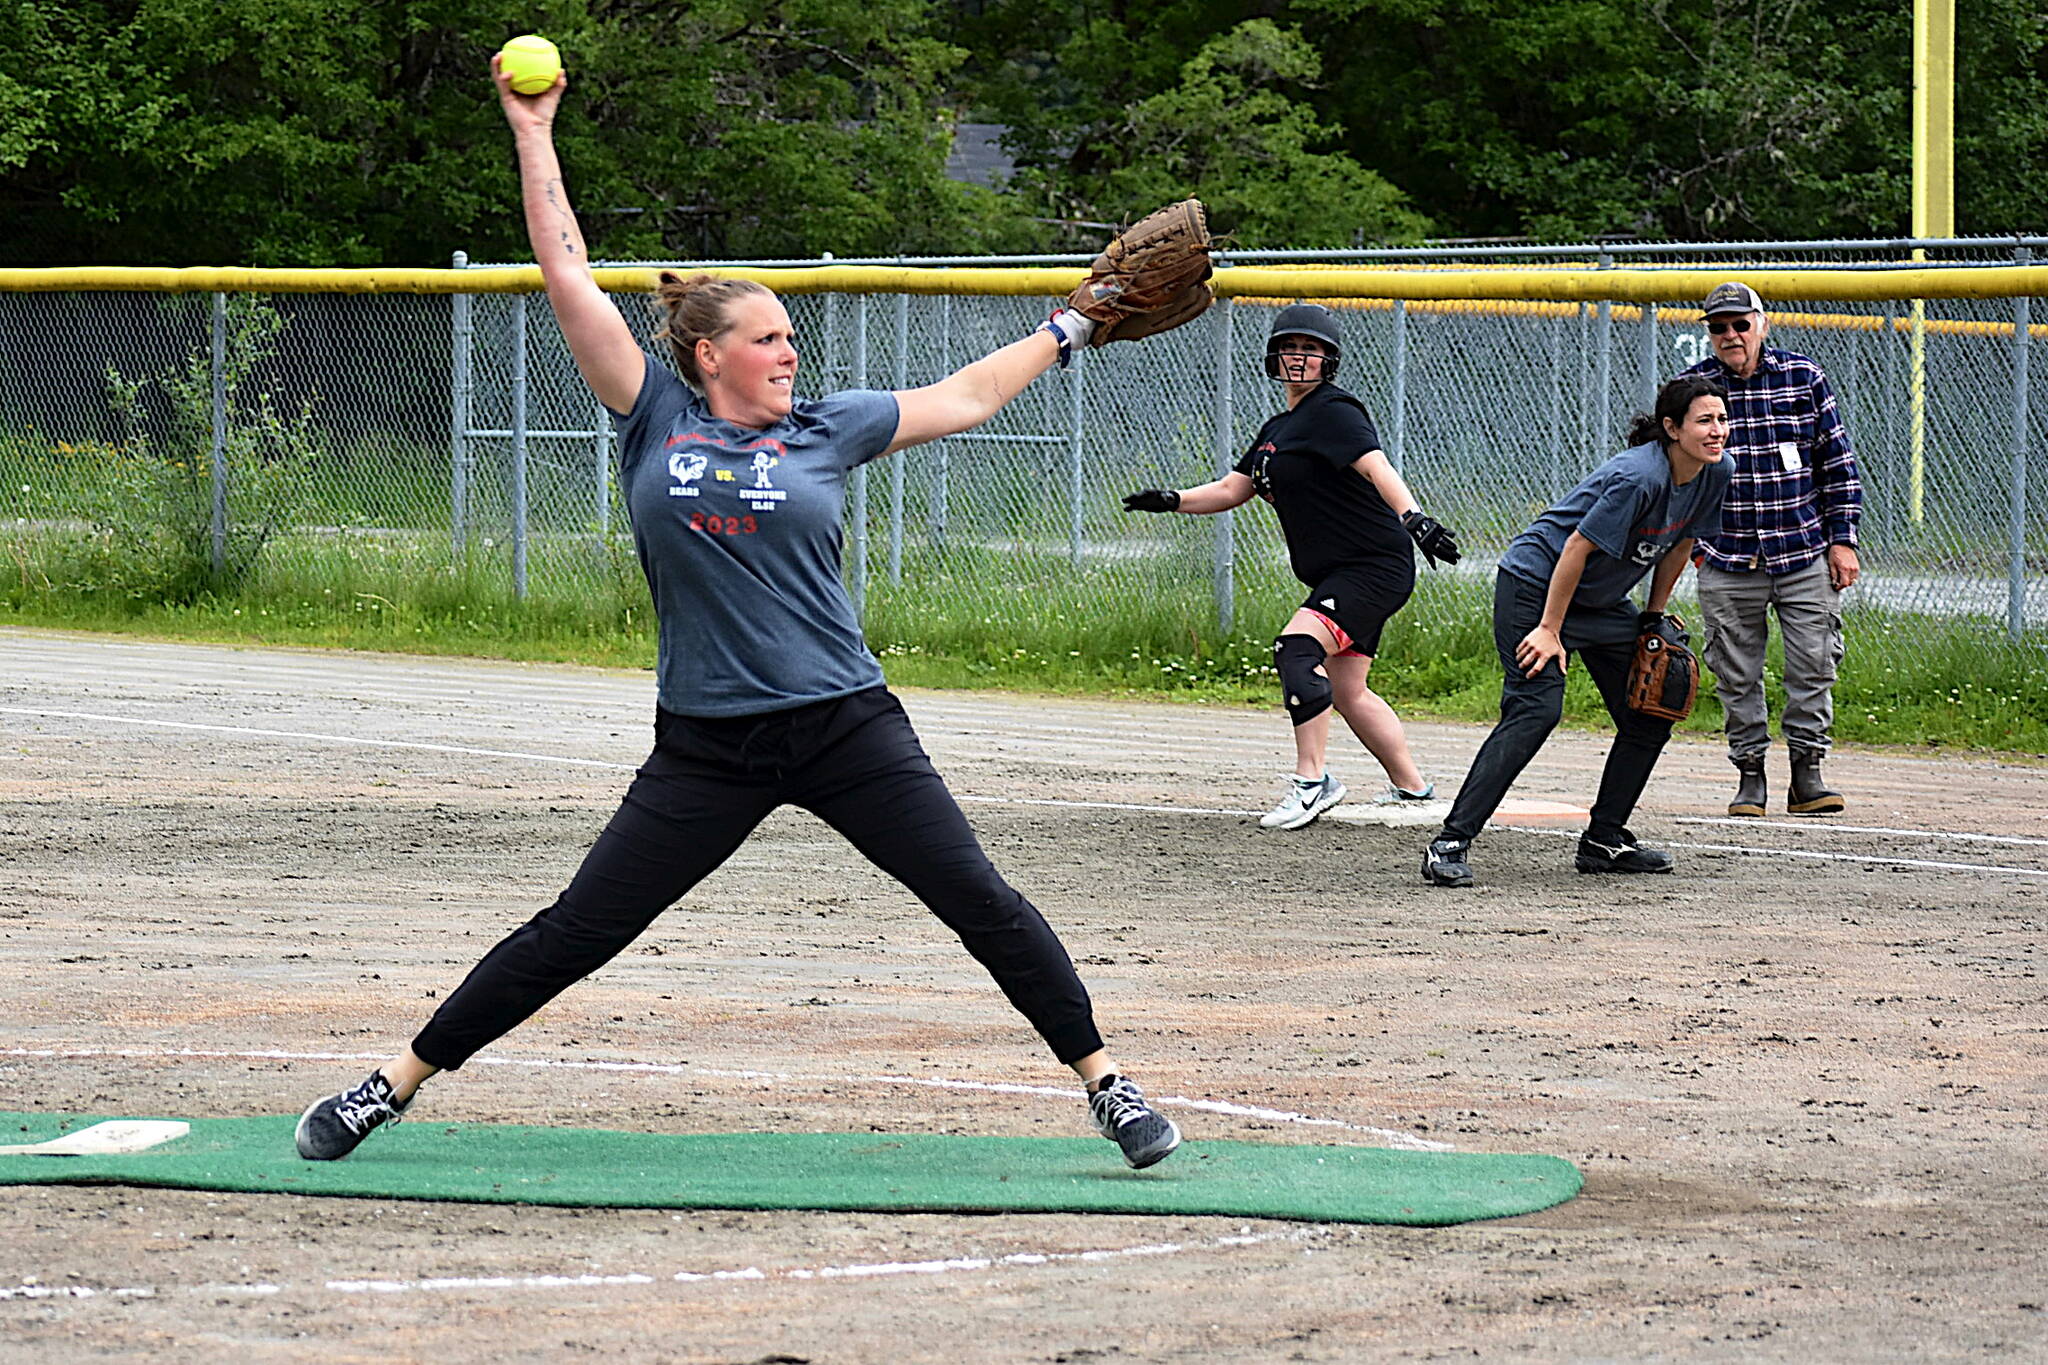 Nicole Adair, a 2001 graduate of Juneau-Douglas High School: Yadaat.at Kalé, pitches for the Antiques as teammate Tania Hansen, a 1998 graduate, plays first base and Angi Thibodeau, a 1999 graduate, awaits an opportunity to advance as a member of the Classics during the fourth annual JDHS Softball Alumni Game on Sunday at Melvin Park. (Photo courtesy of JDHS softball)